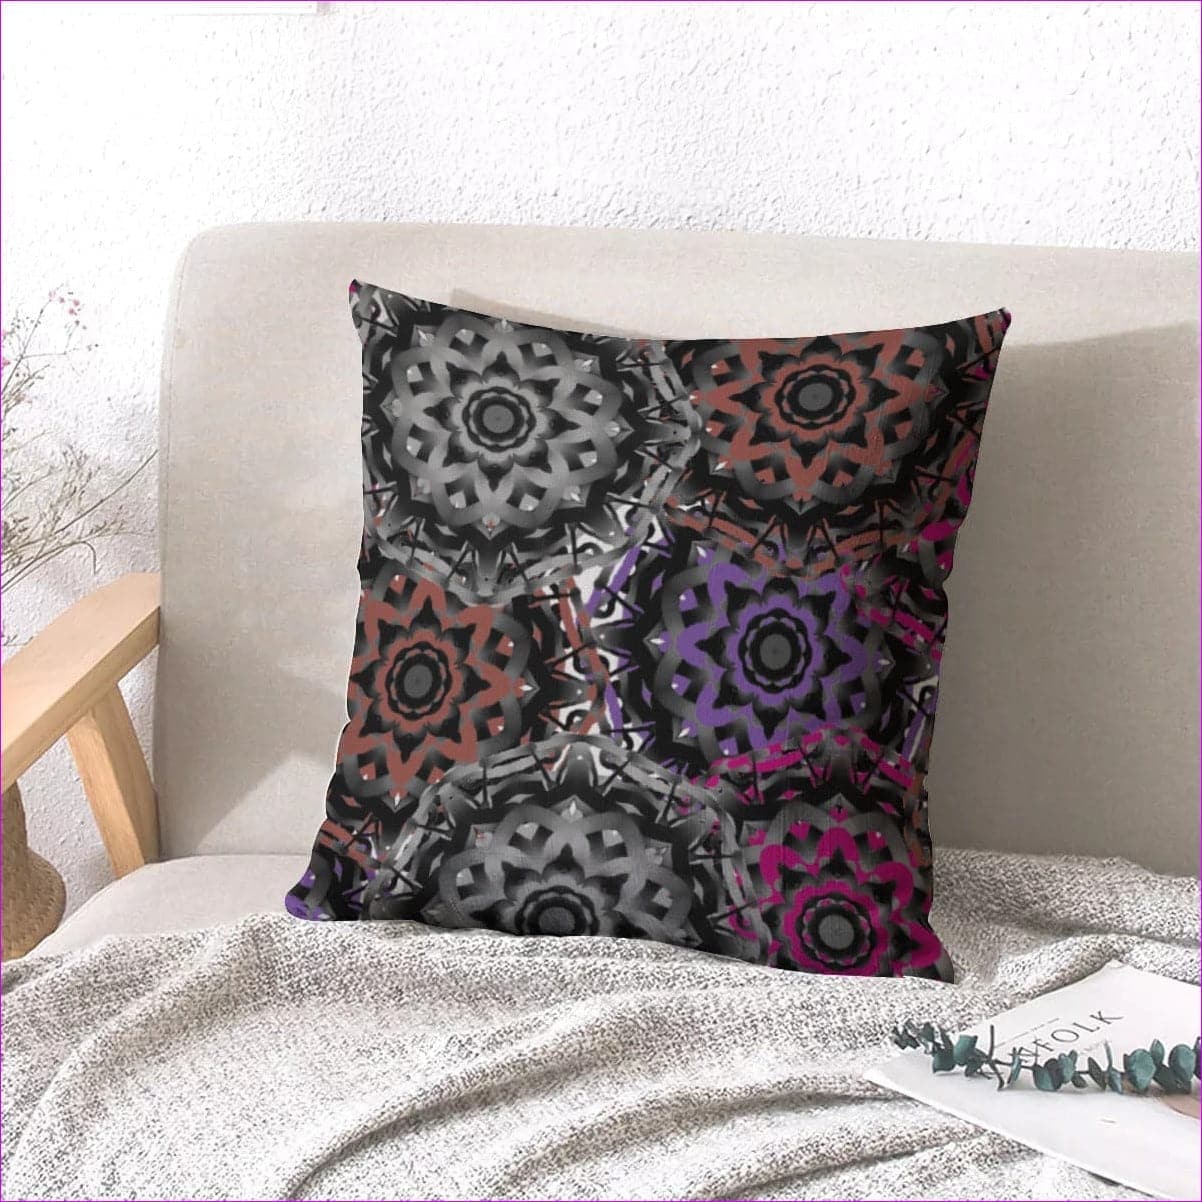 Mandala Graffiti Couch pillow with pillow Inserts | linen type fabric Ma - throw pillow at TFC&H Co.